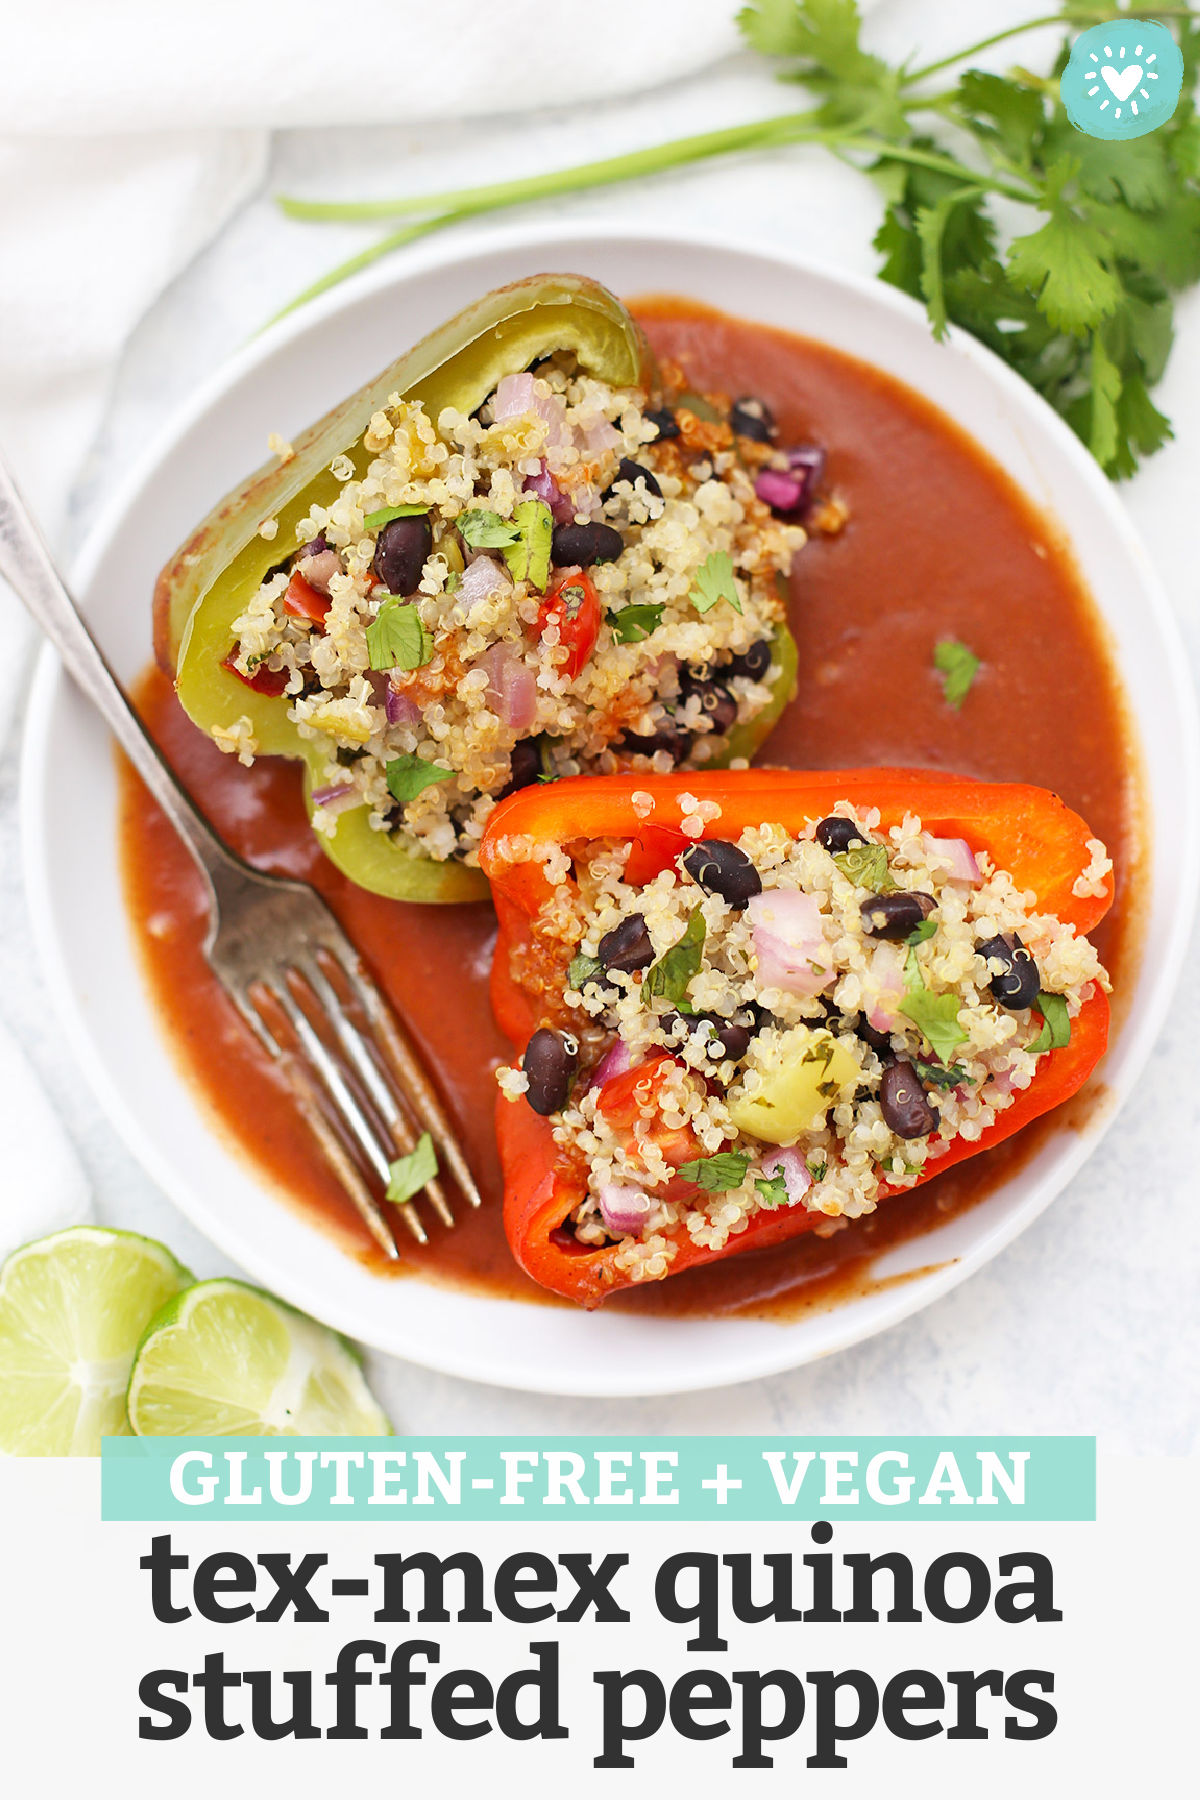 Mexican Stuffed Peppers with Quinoa and Black Beans - This gluten free, vegan dinner is SO GREAT for meal prep! (Don't skip the easy homemade enchilada sauce!) // Tex Mex Quinoa Stuffed Peppers // Vegan Stuffed Peppers #stuffedpeppers #vegandinner #healthydinner #vegan #glutenfree